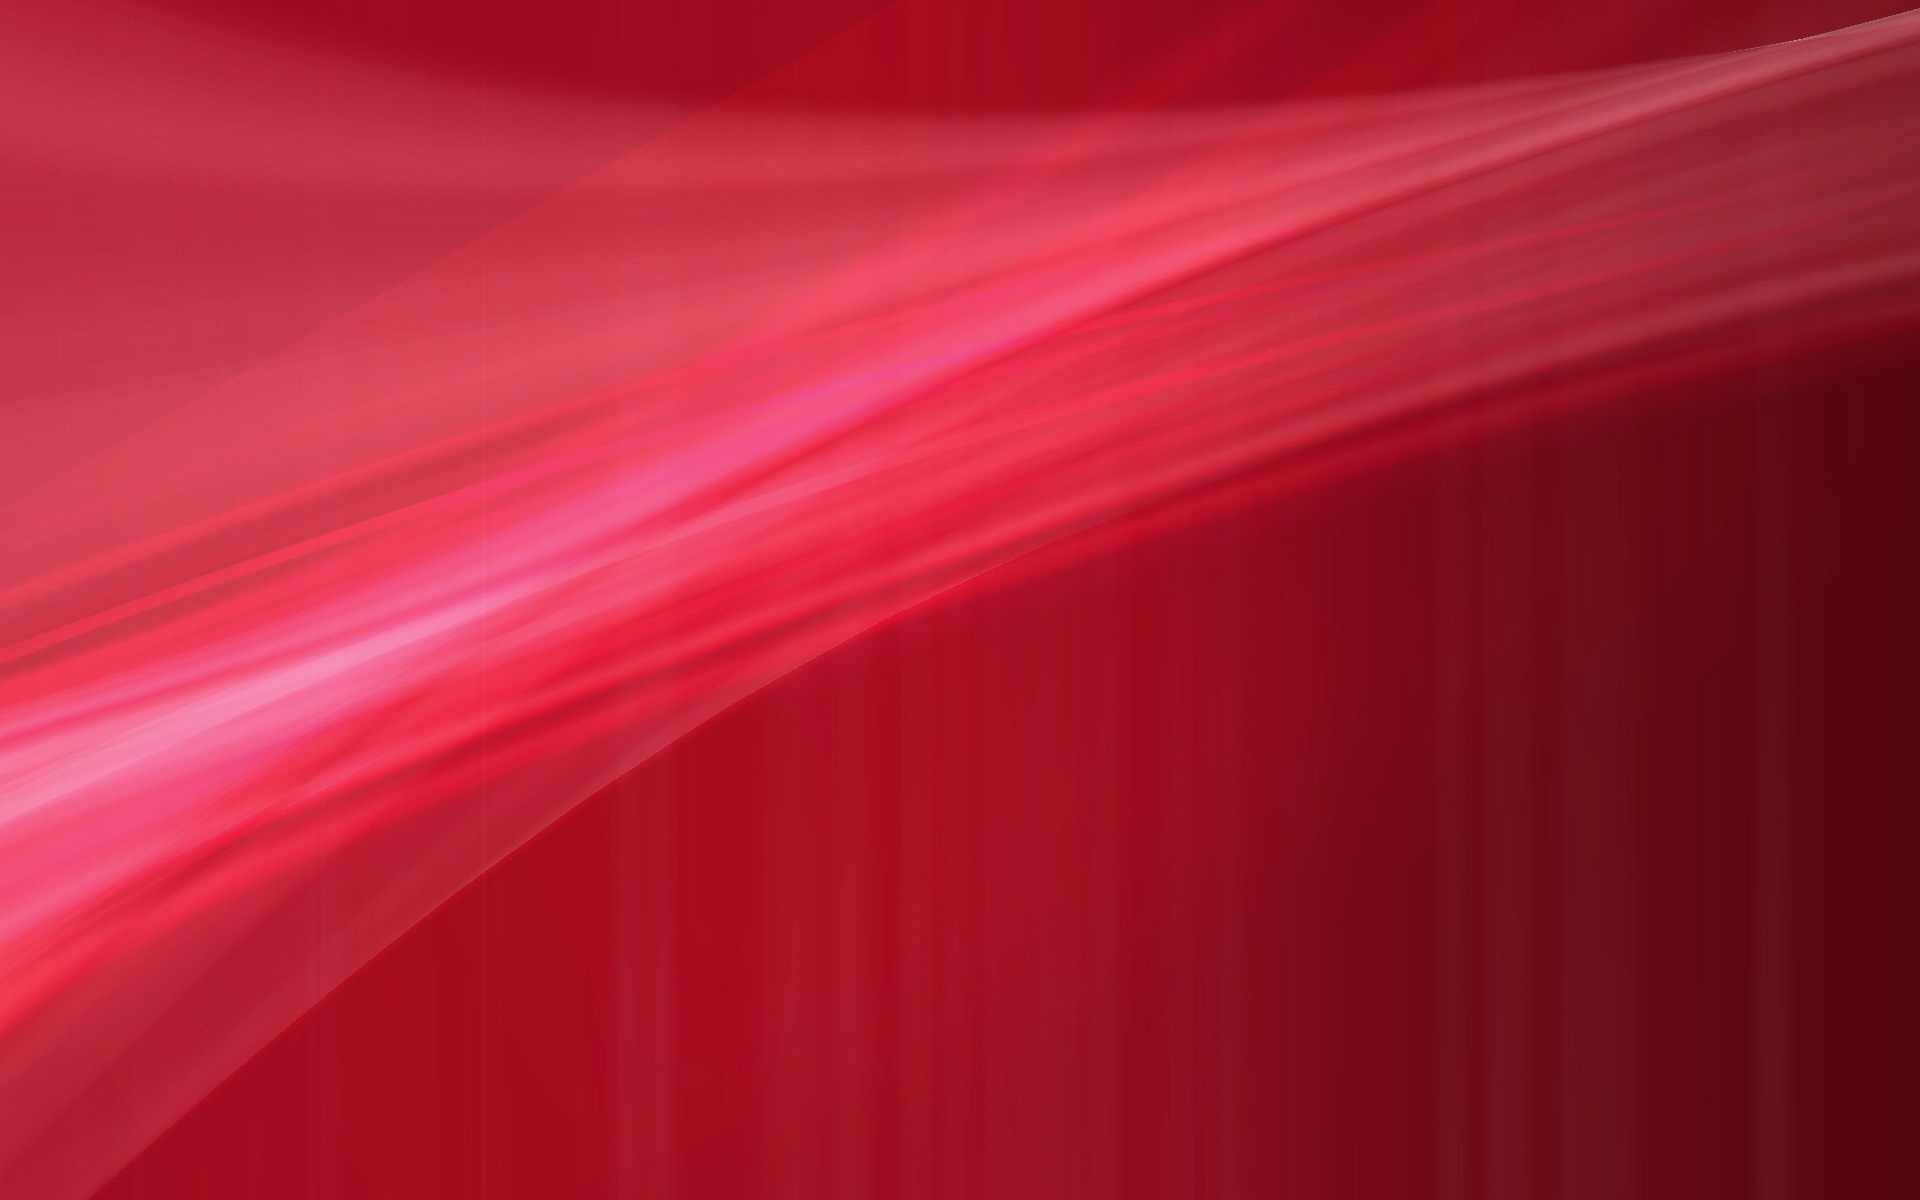 Red In Abstract HD Wallpaper For Desktop